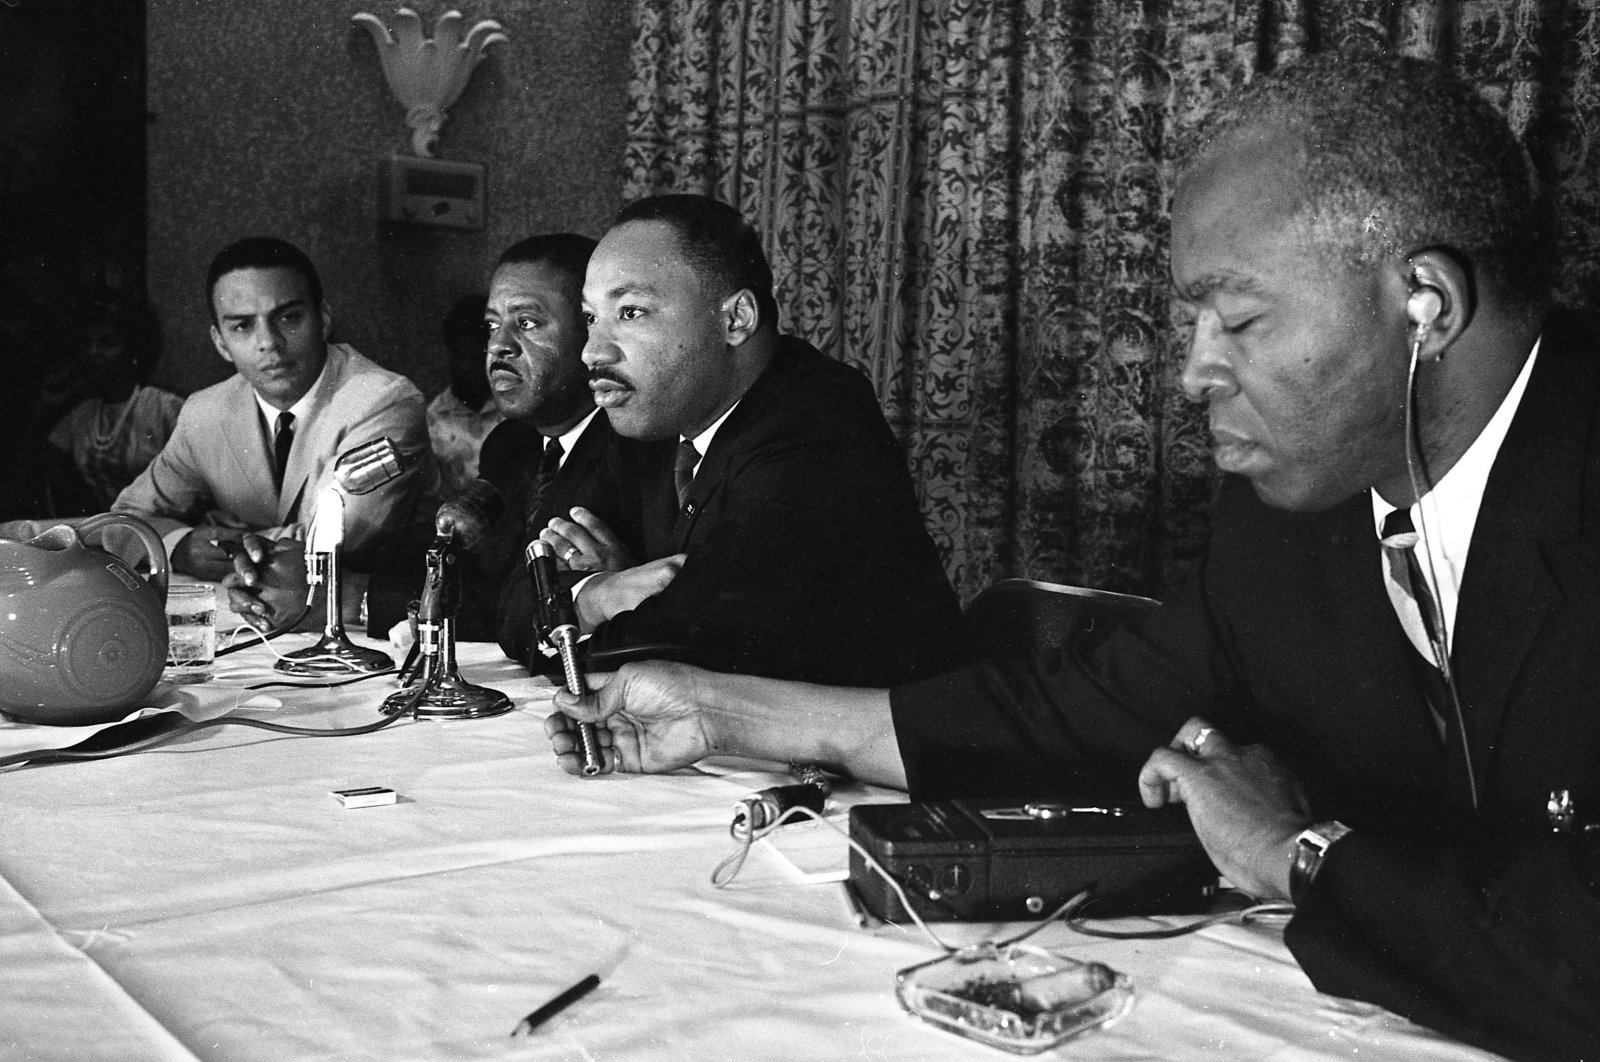 Rev. Martin Luther King, (C) speaks with the media at the Southern Christian Leadership Conference convention in Savannah, Georgia, U.S., Sept. 29, 1964. (AP Photo)